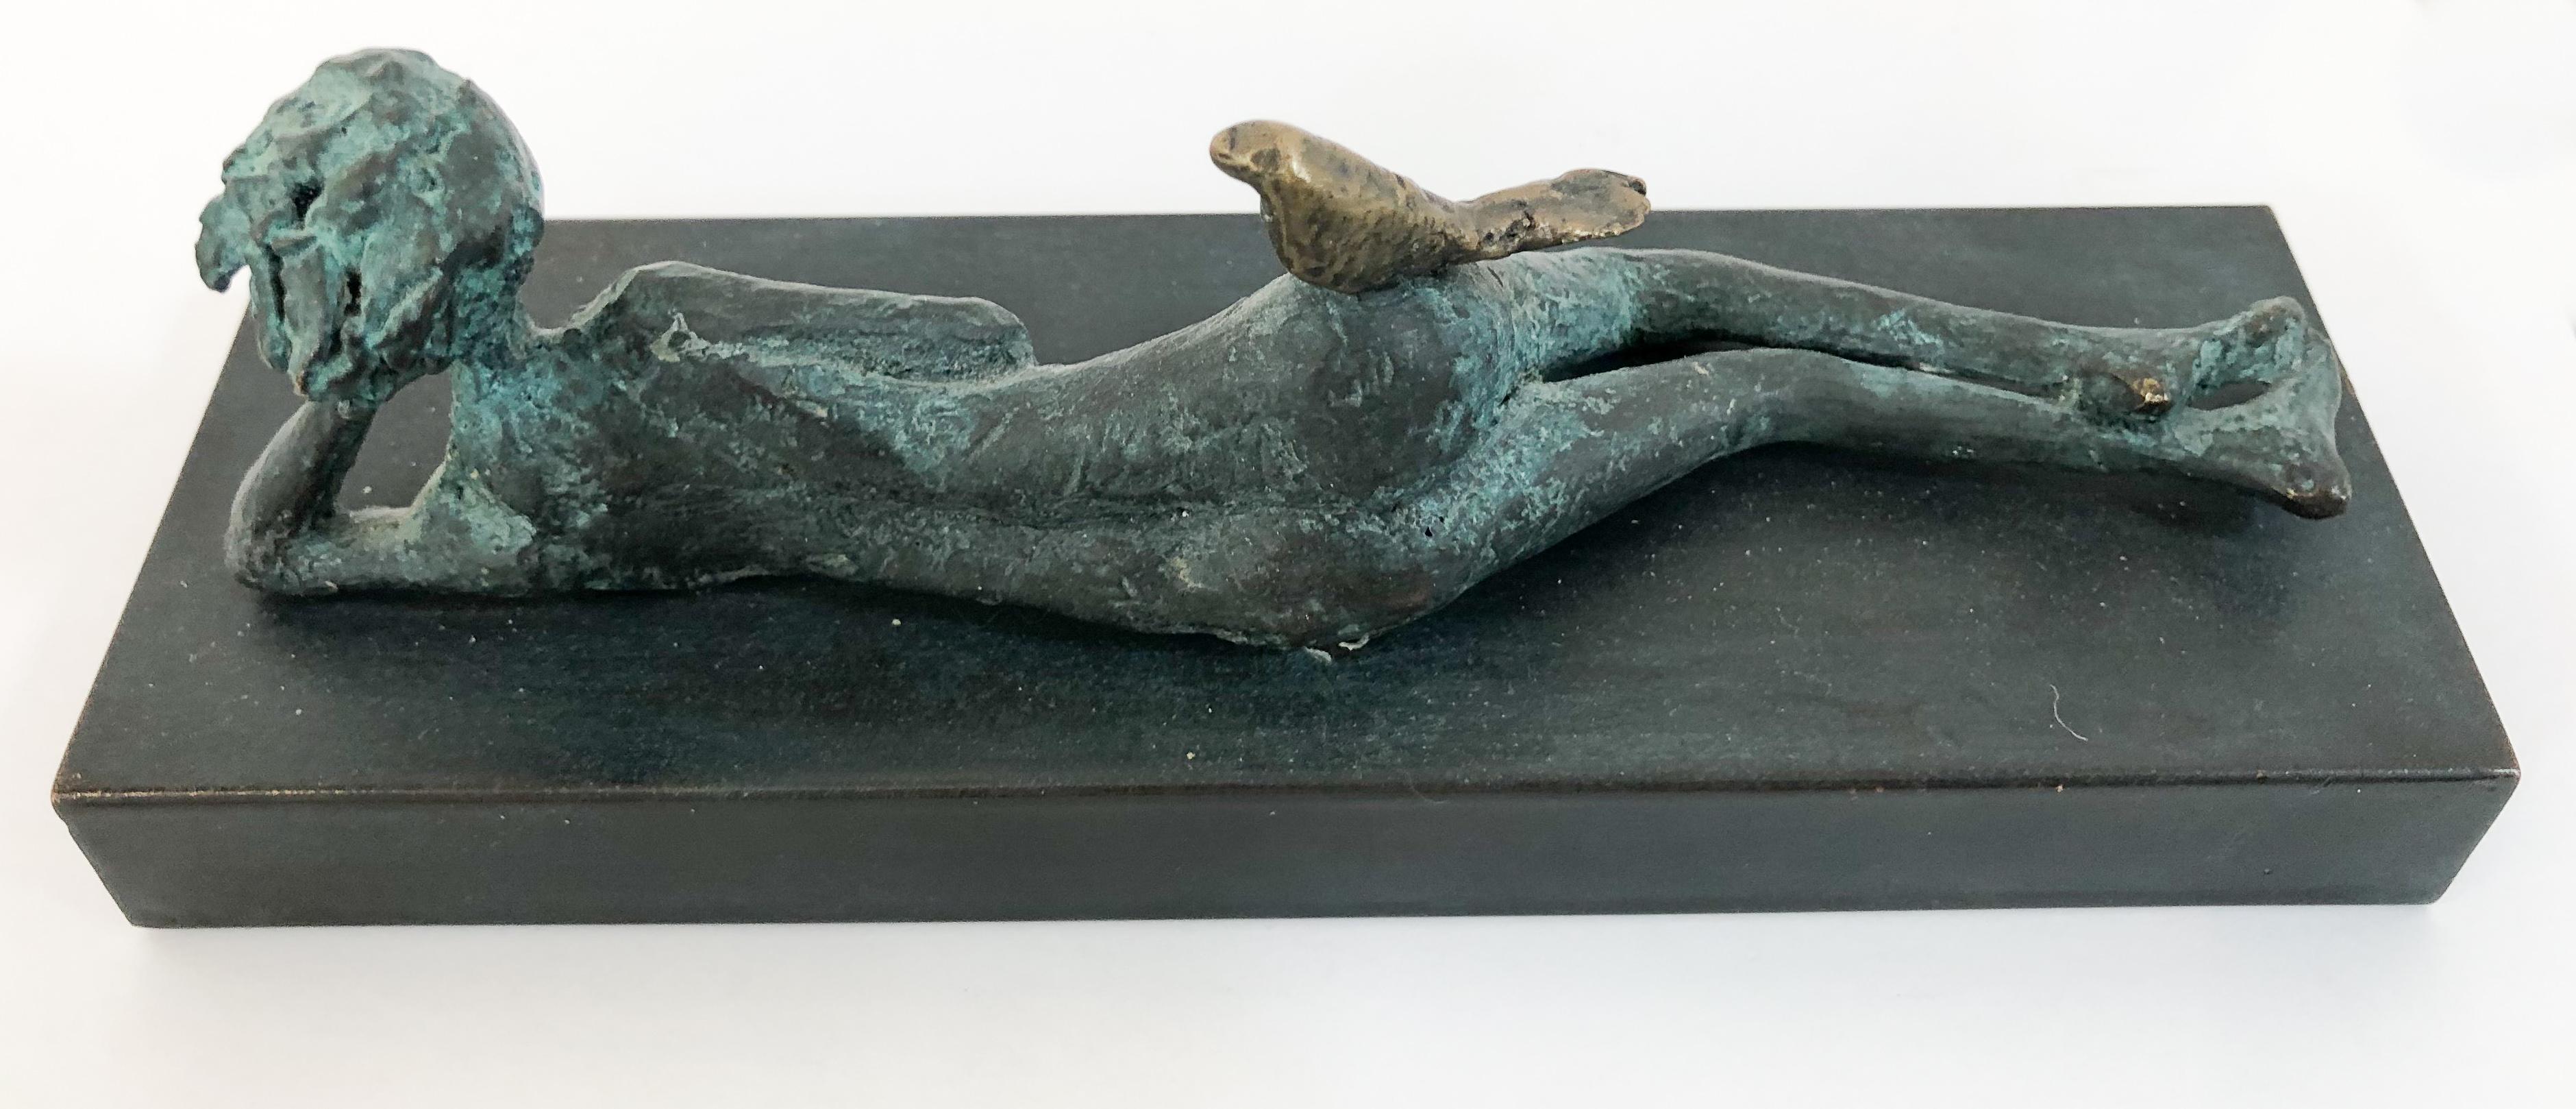 This is an original, one-of-a-kind bronze sculpture by Hadiya Finley. 

Hadiya’s work begins as intuitive visualizations, and through the processes of manipulating materials becomes articulated into meaning. Her desire is to create art which